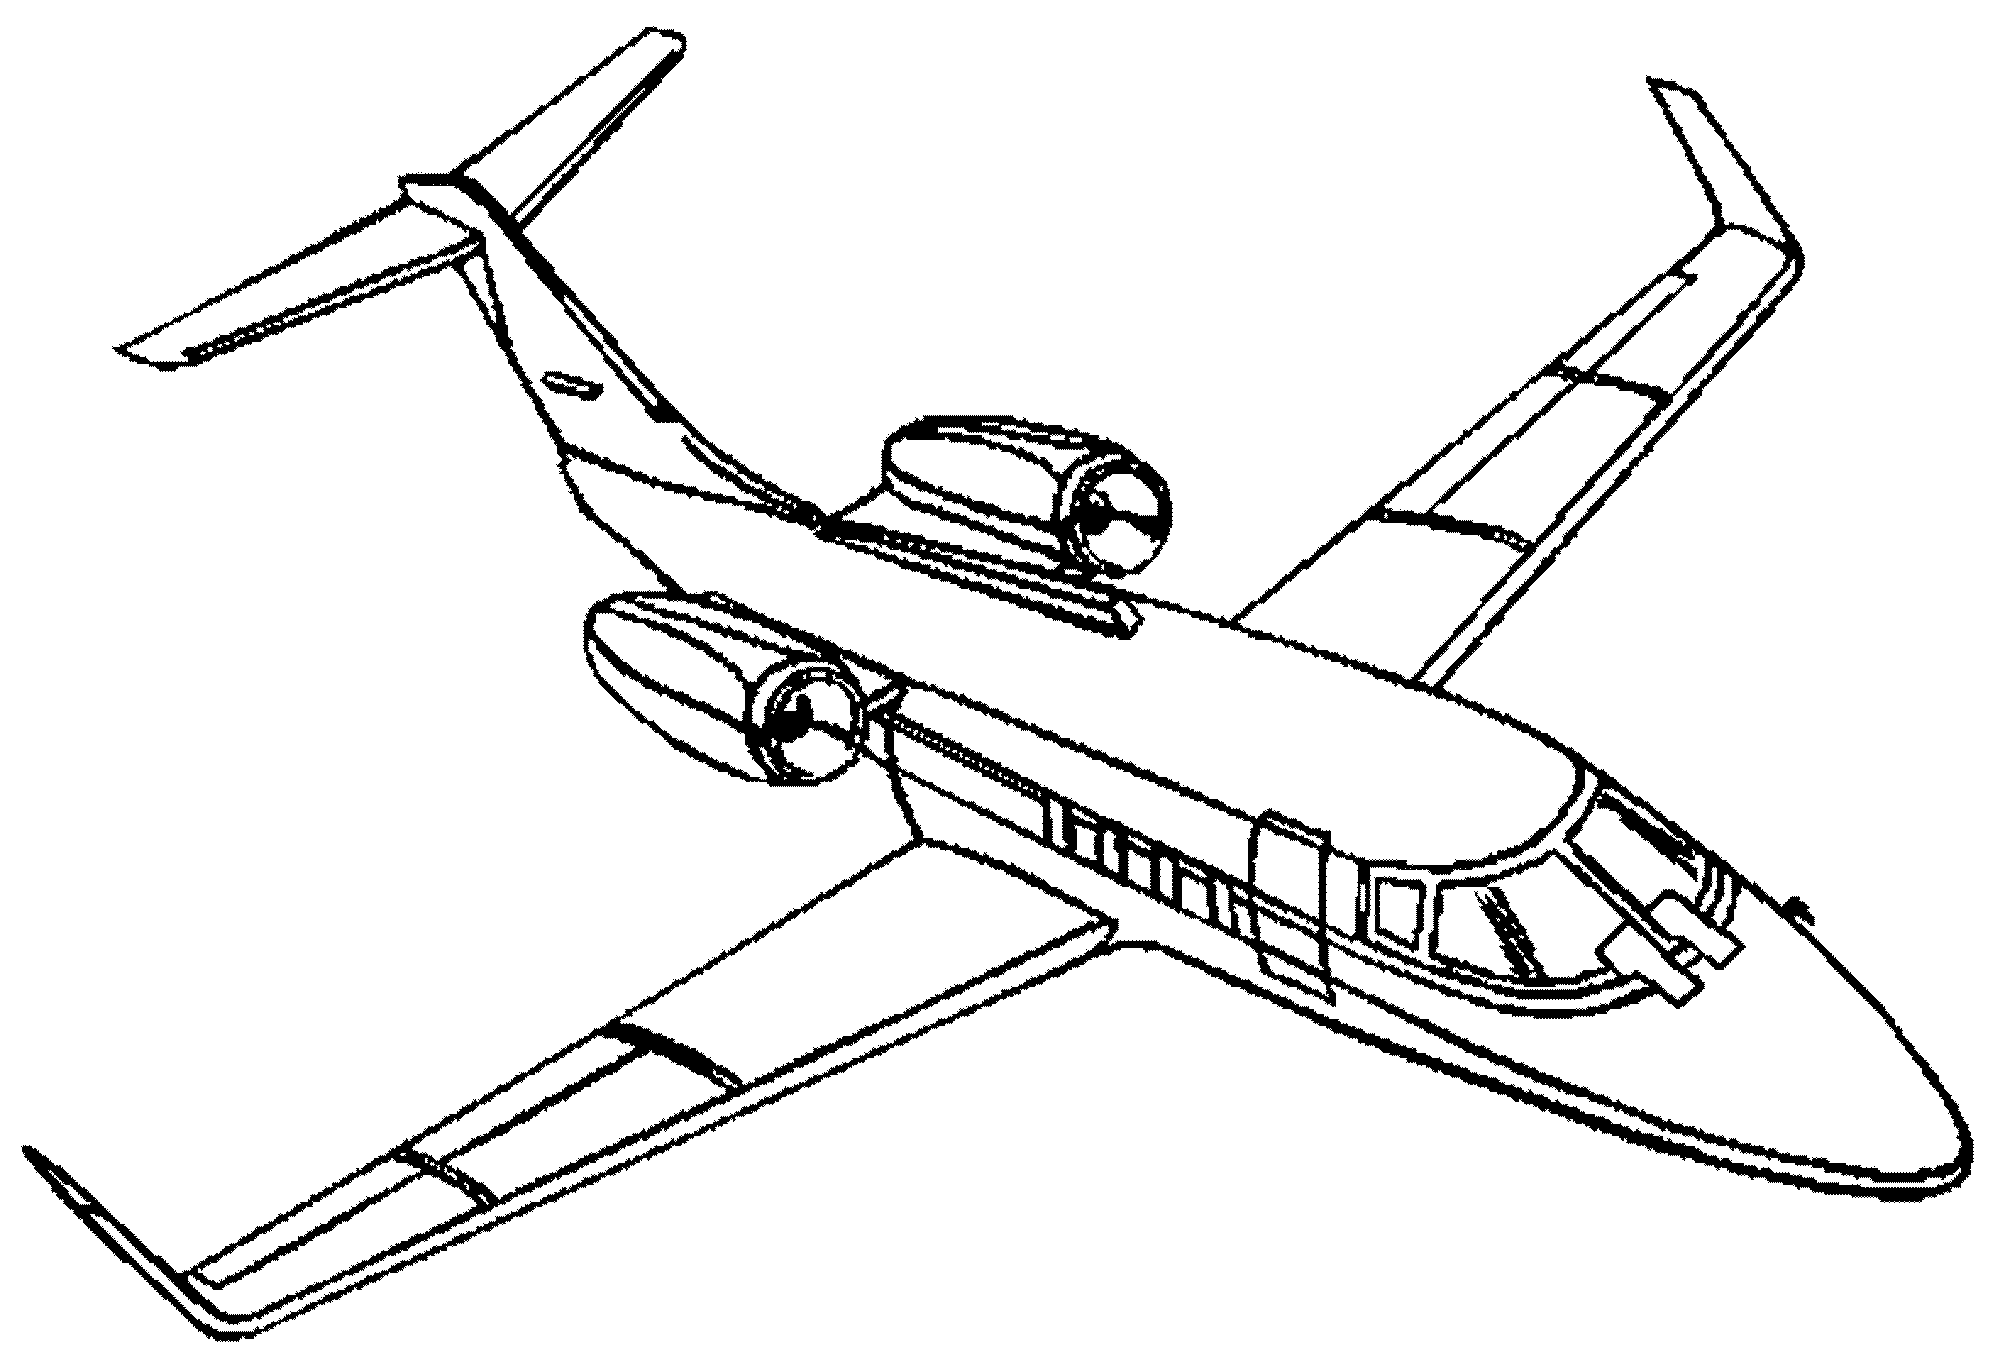 aircraft-coloring-pages-coloring-home